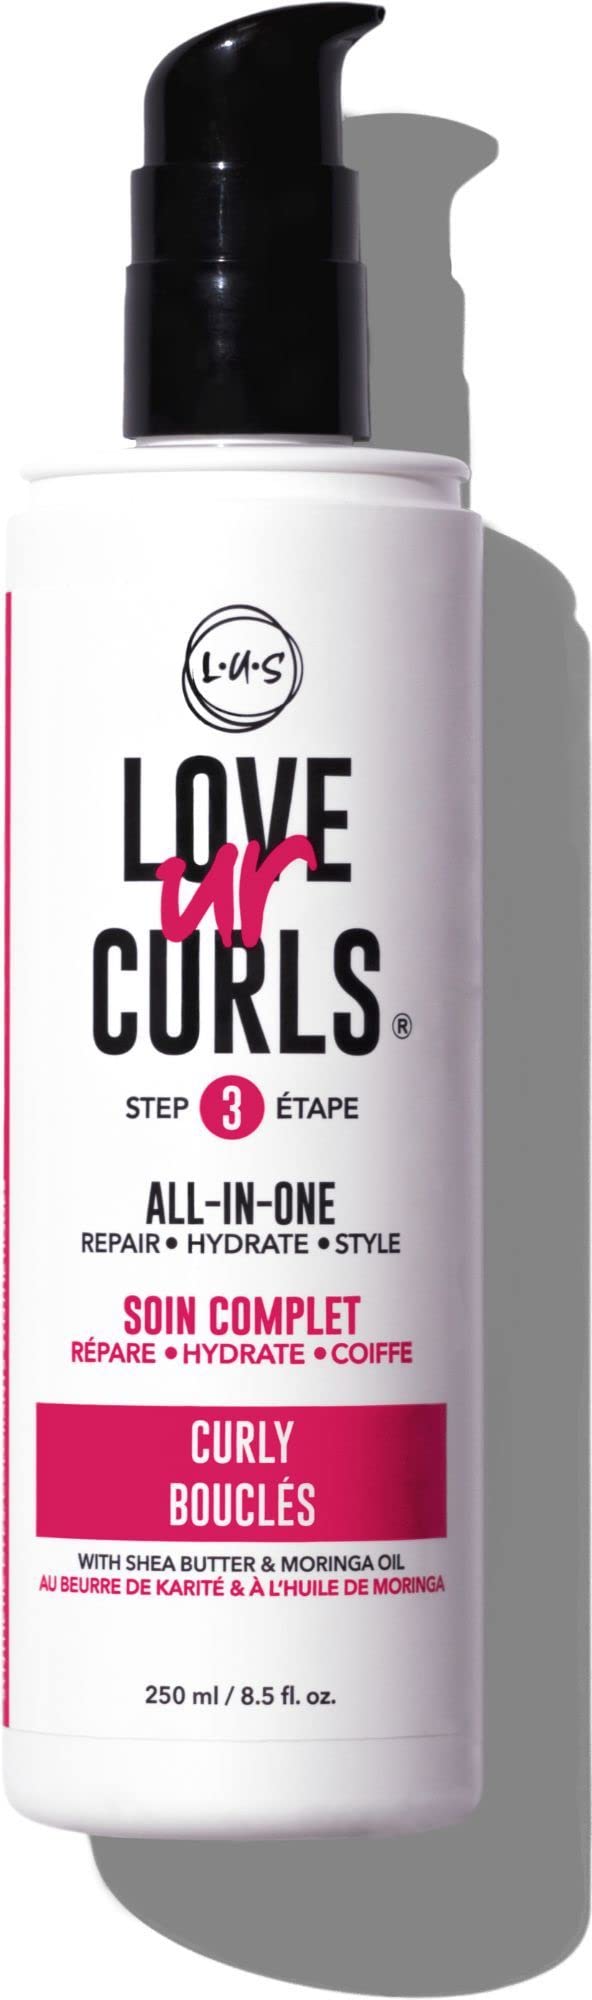 LUS Brands Love Ur Curls All-in-One Styler for Curly Hair, 8.5oz - Repair, Hydrate, and Style in One Step - For Natural Curly Textures - No Crunch, No Cast, Hair Care With Shea Butter and Moringa